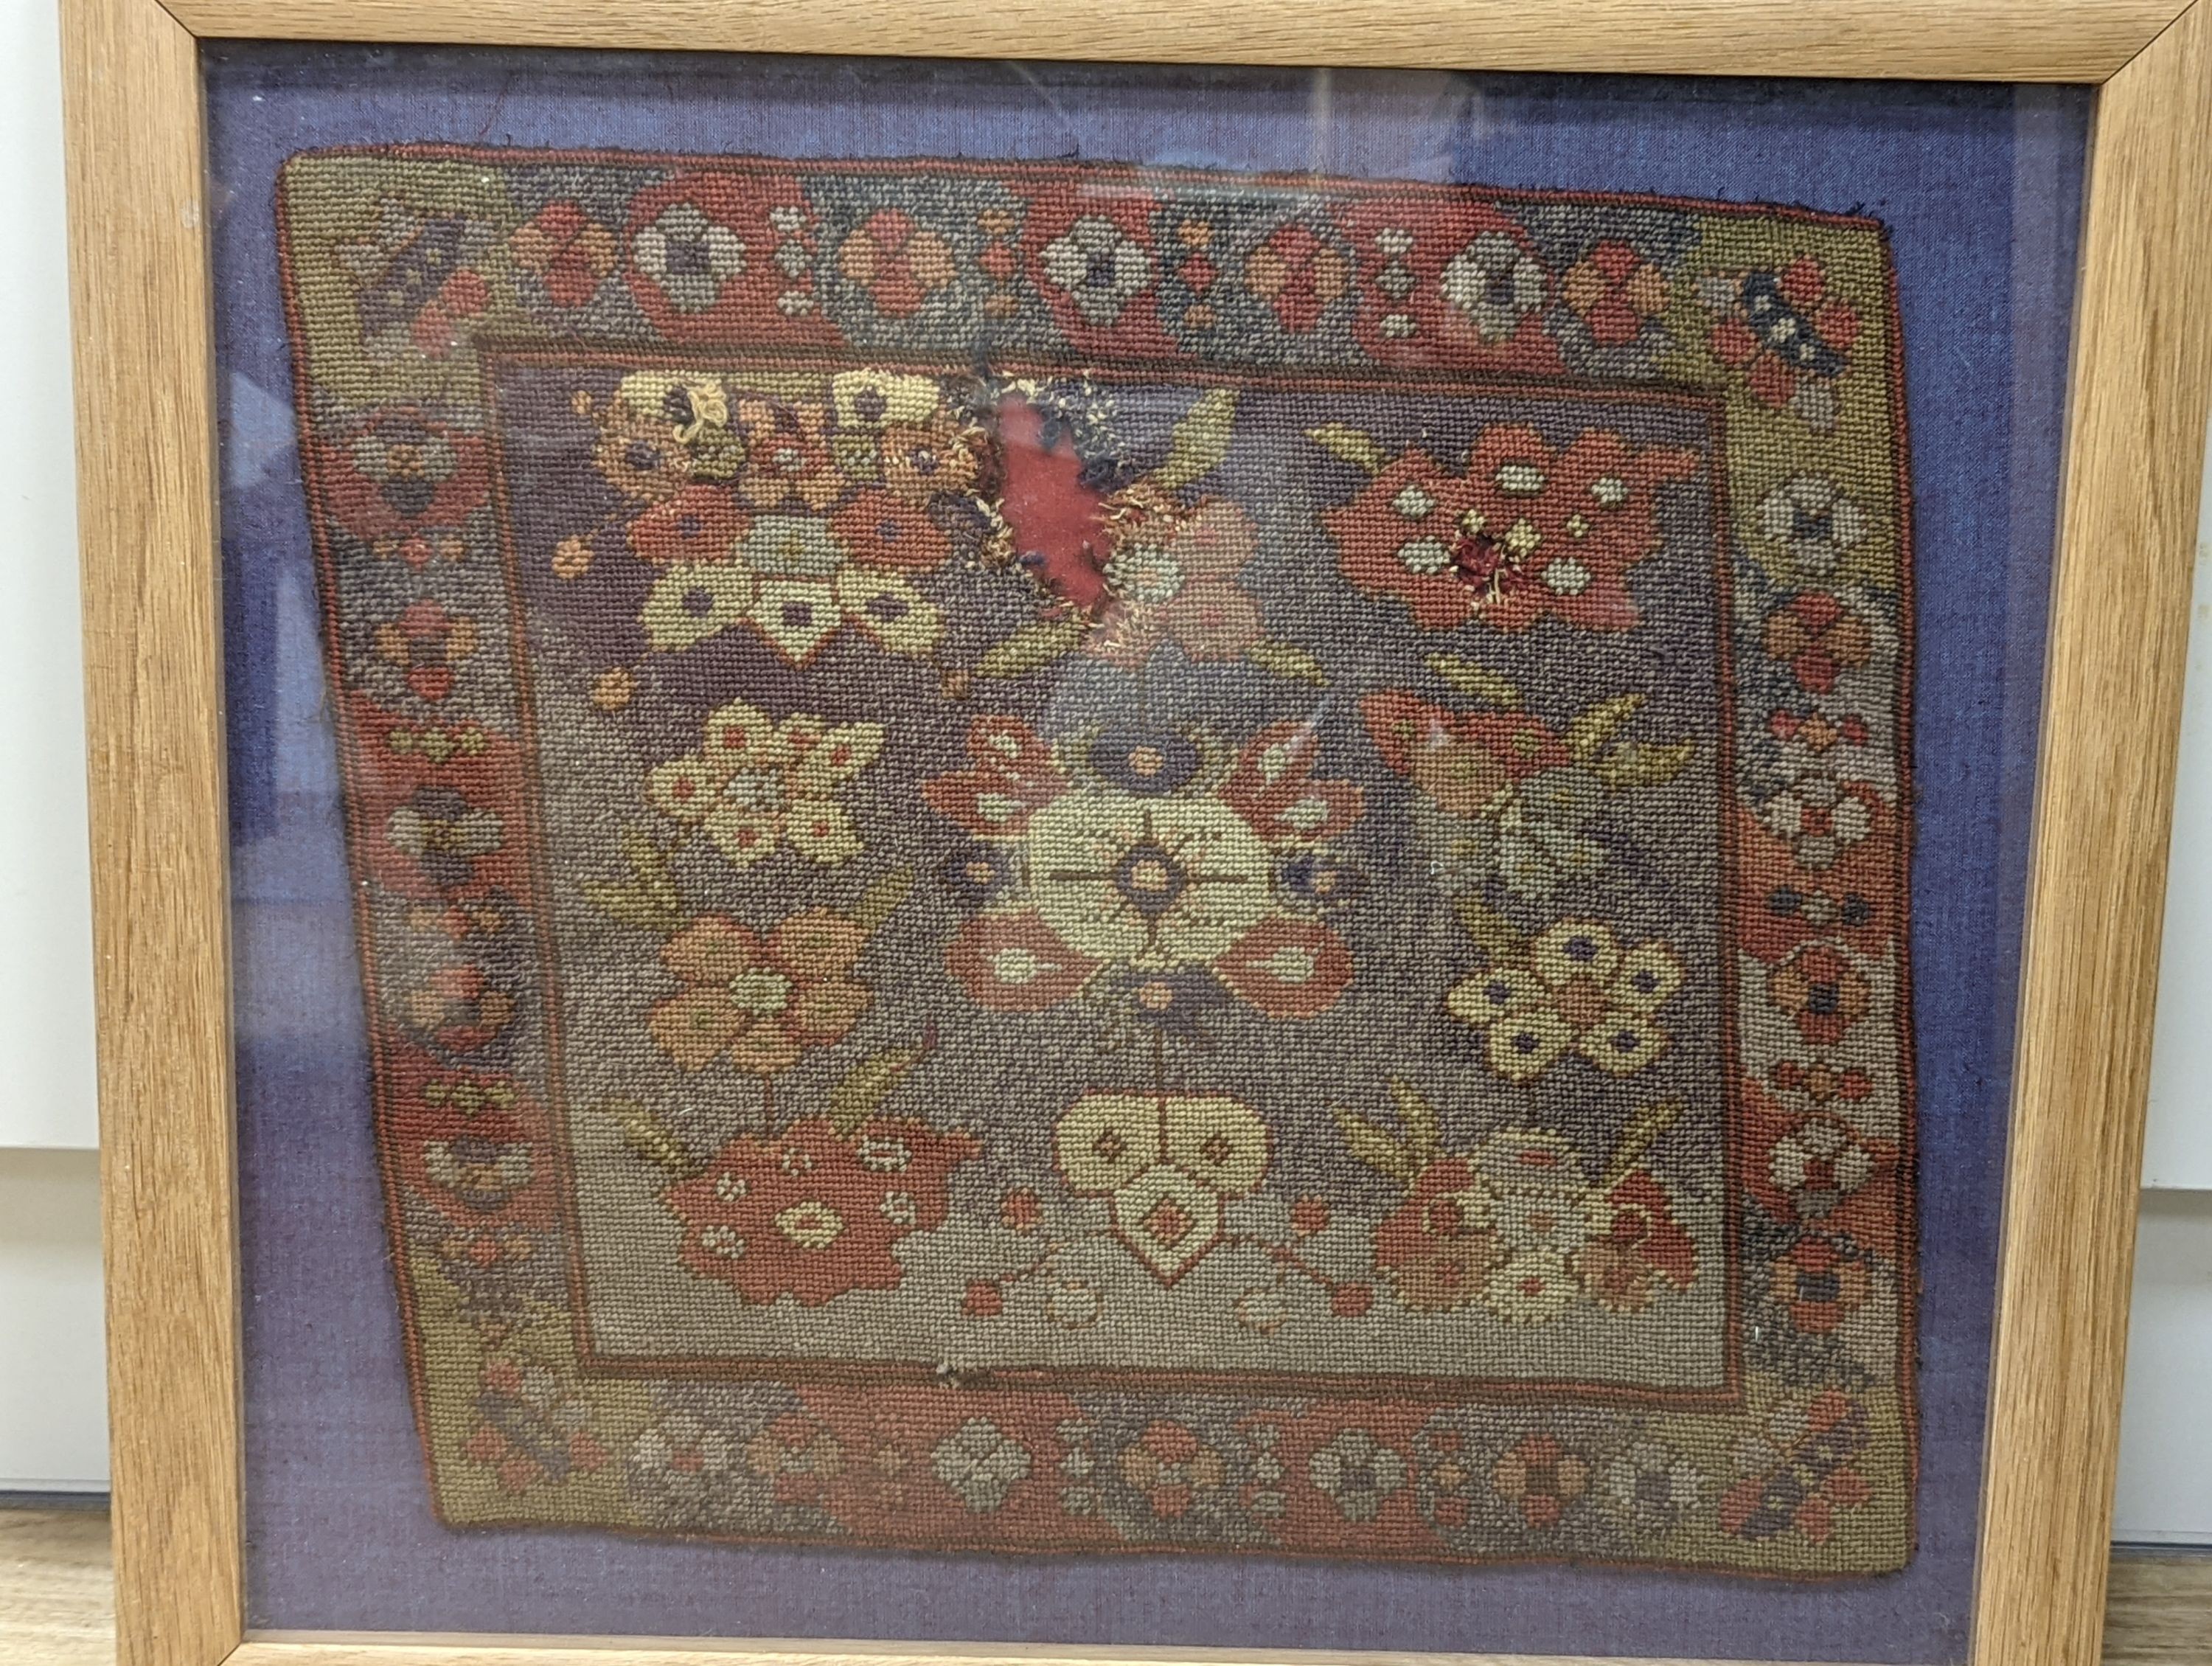 A 19th century Turkish petit point cushion cover, framed 38x43cm excl frame